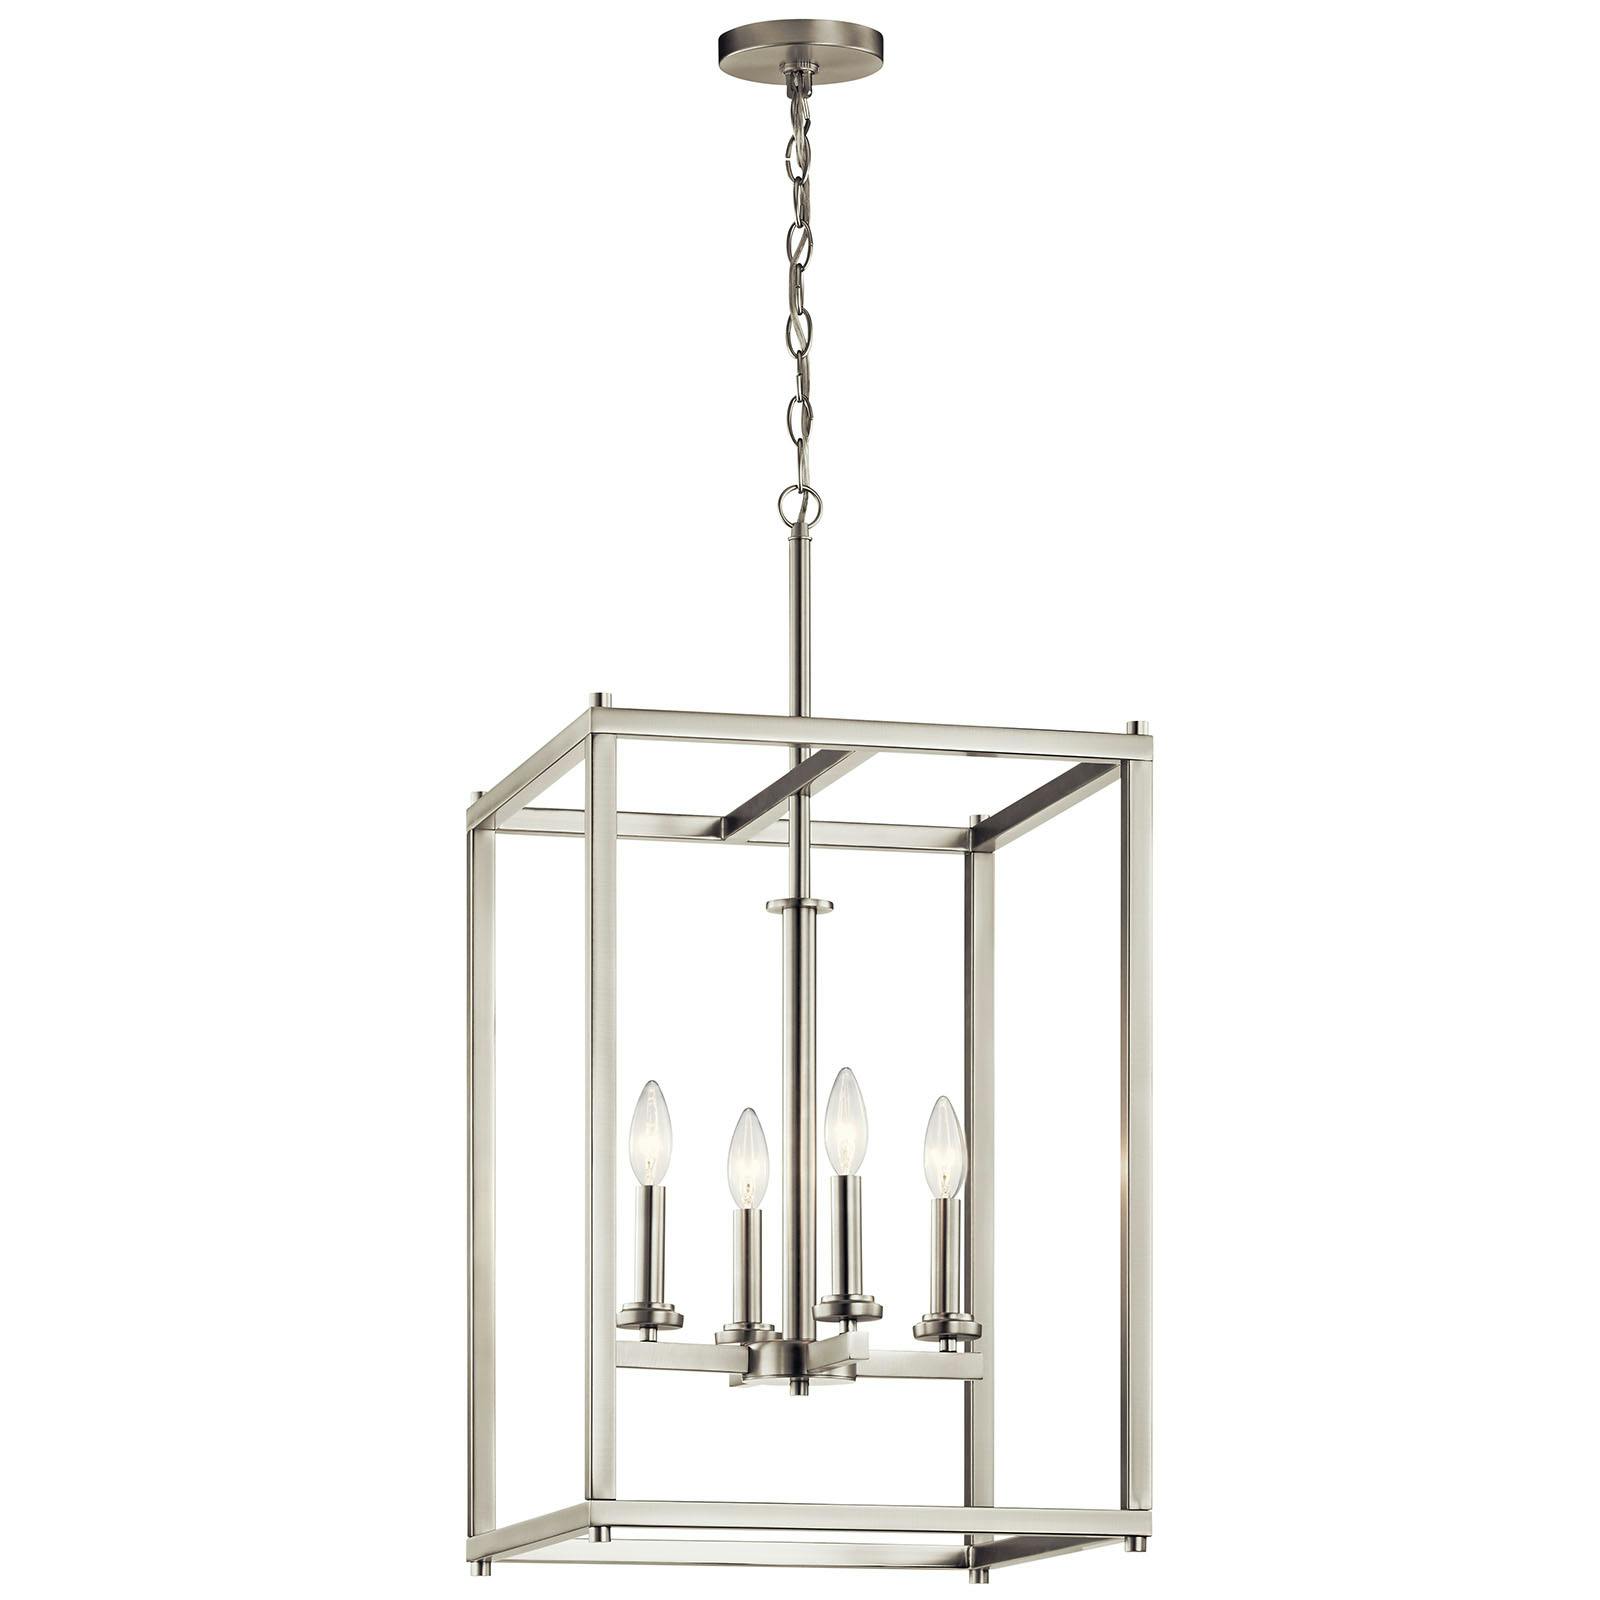 Crosby 31" 4 Light Foyer Pendant Nickel on a white background